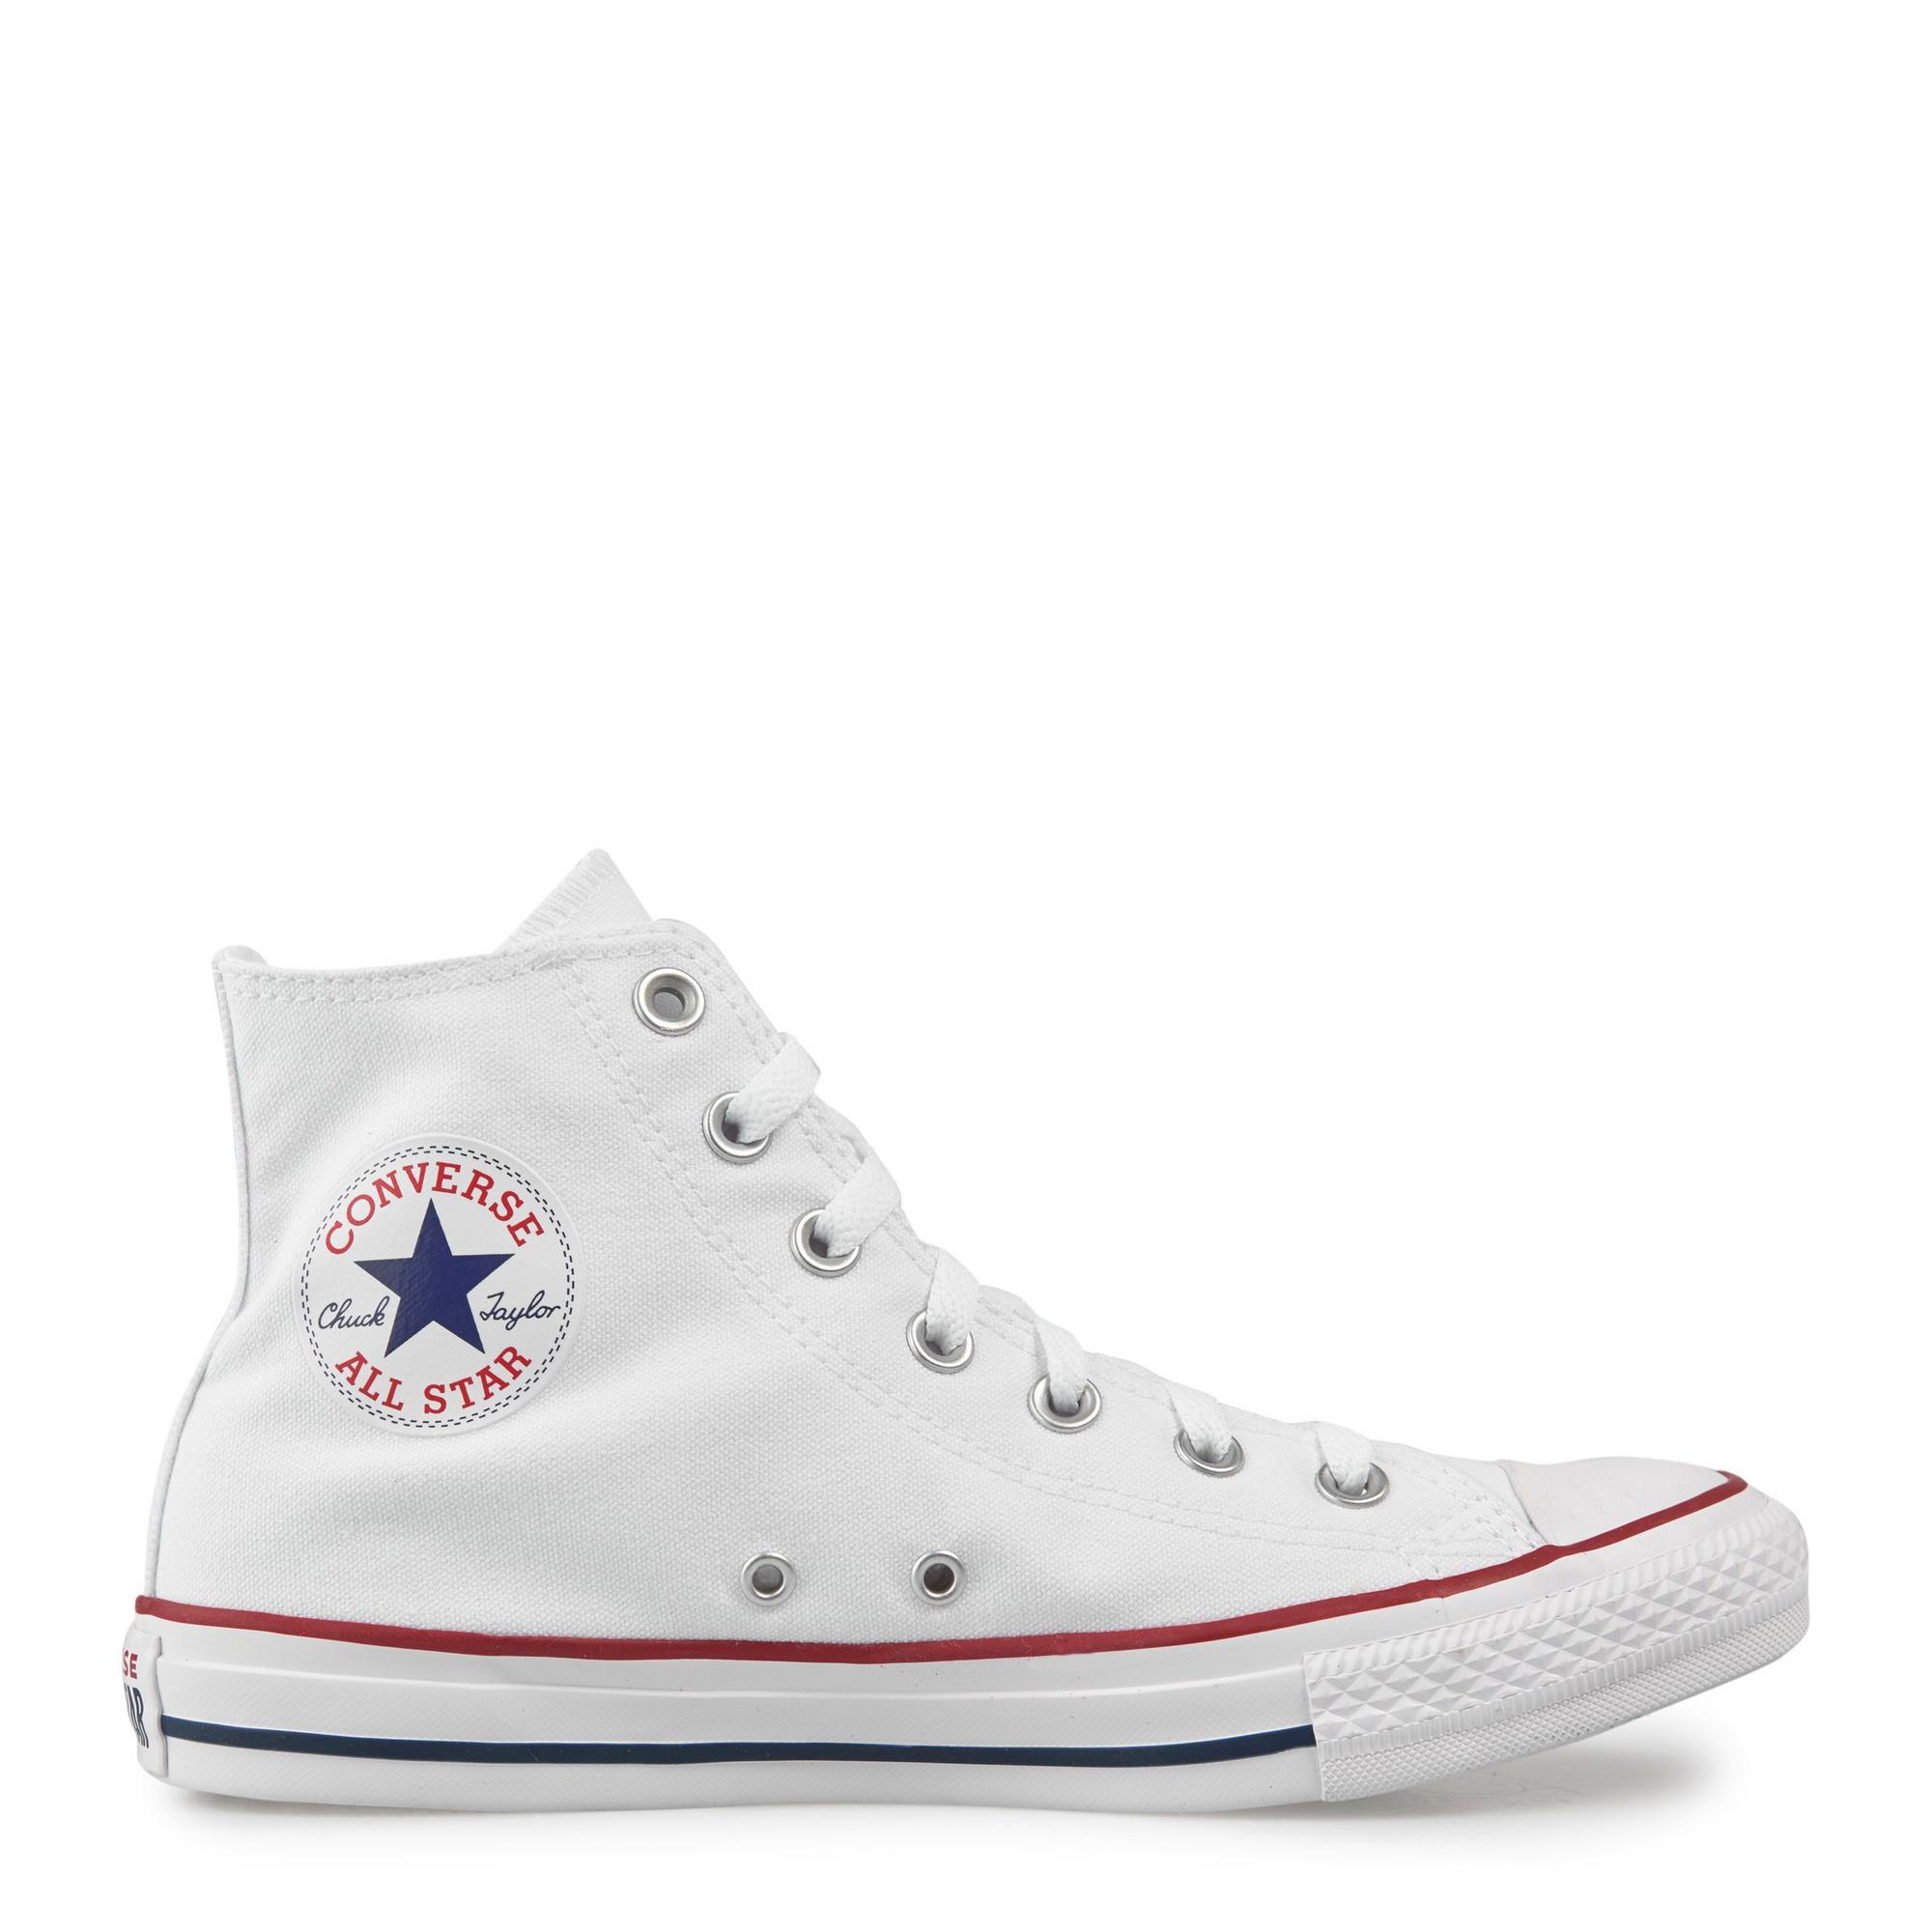 Converse Chuck Taylor All Star White - The Trendy